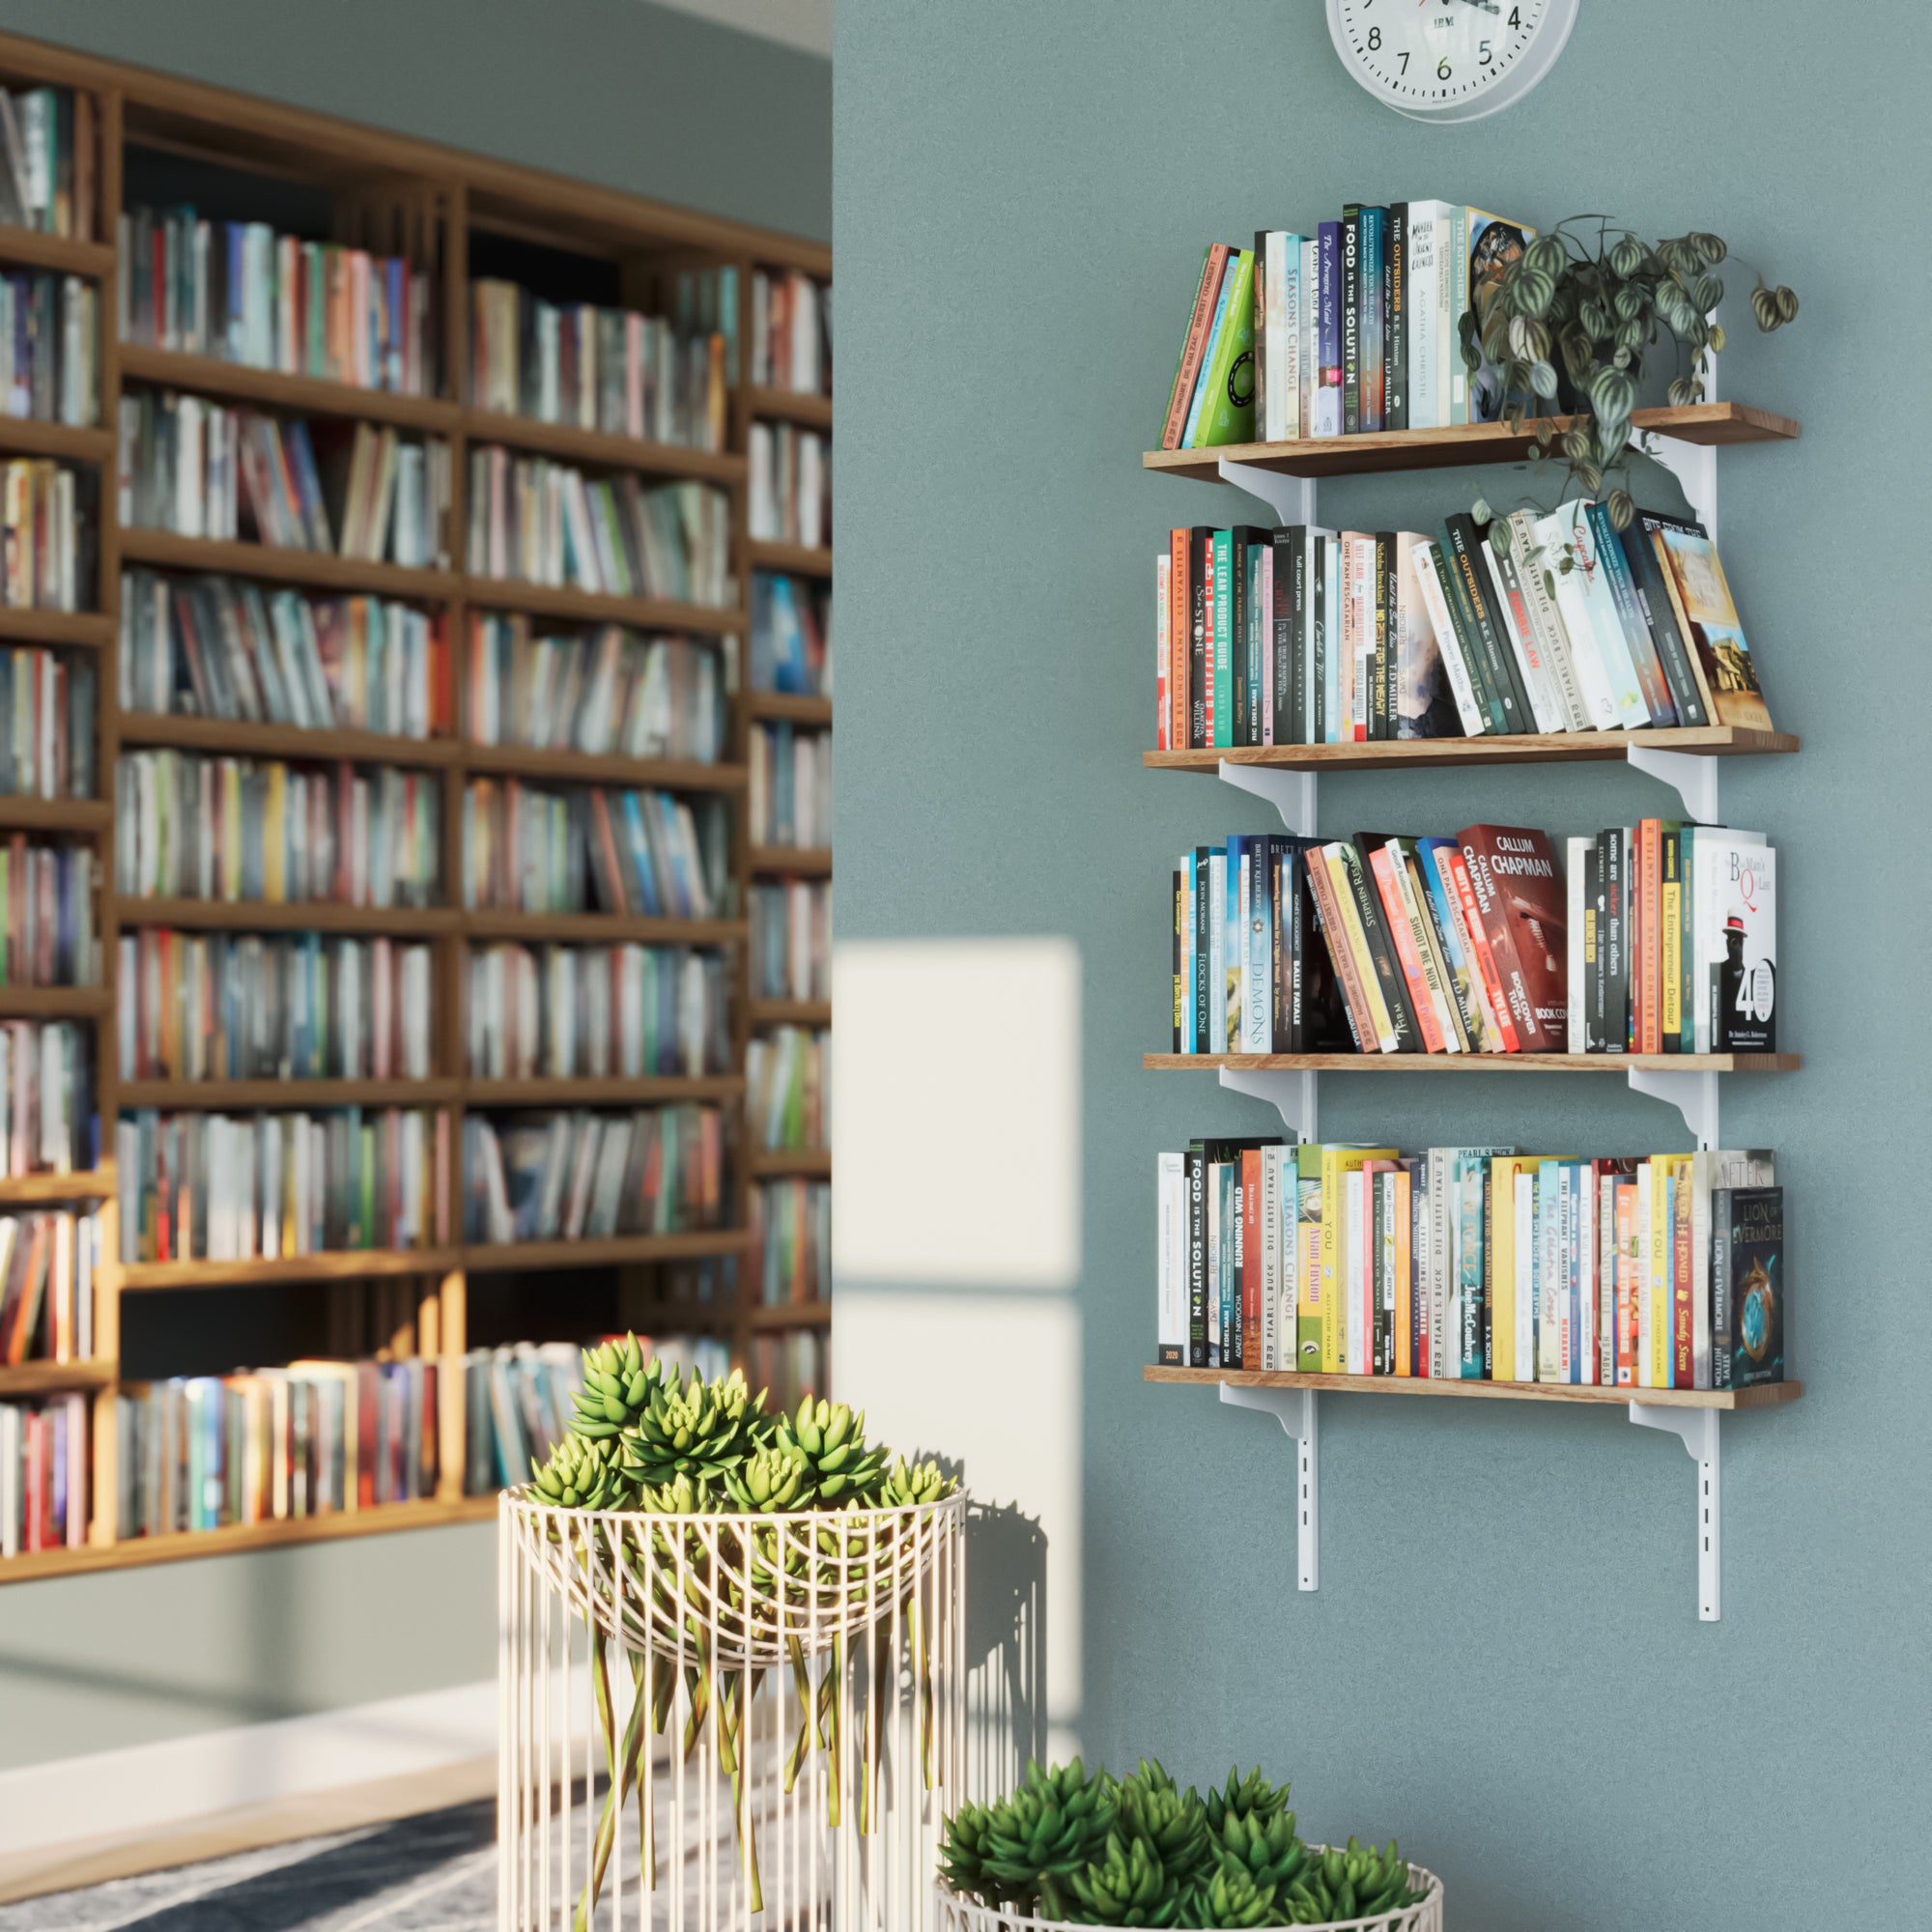 24'' burnt adjustable shelves with stylish books in a reading corner of the living room.